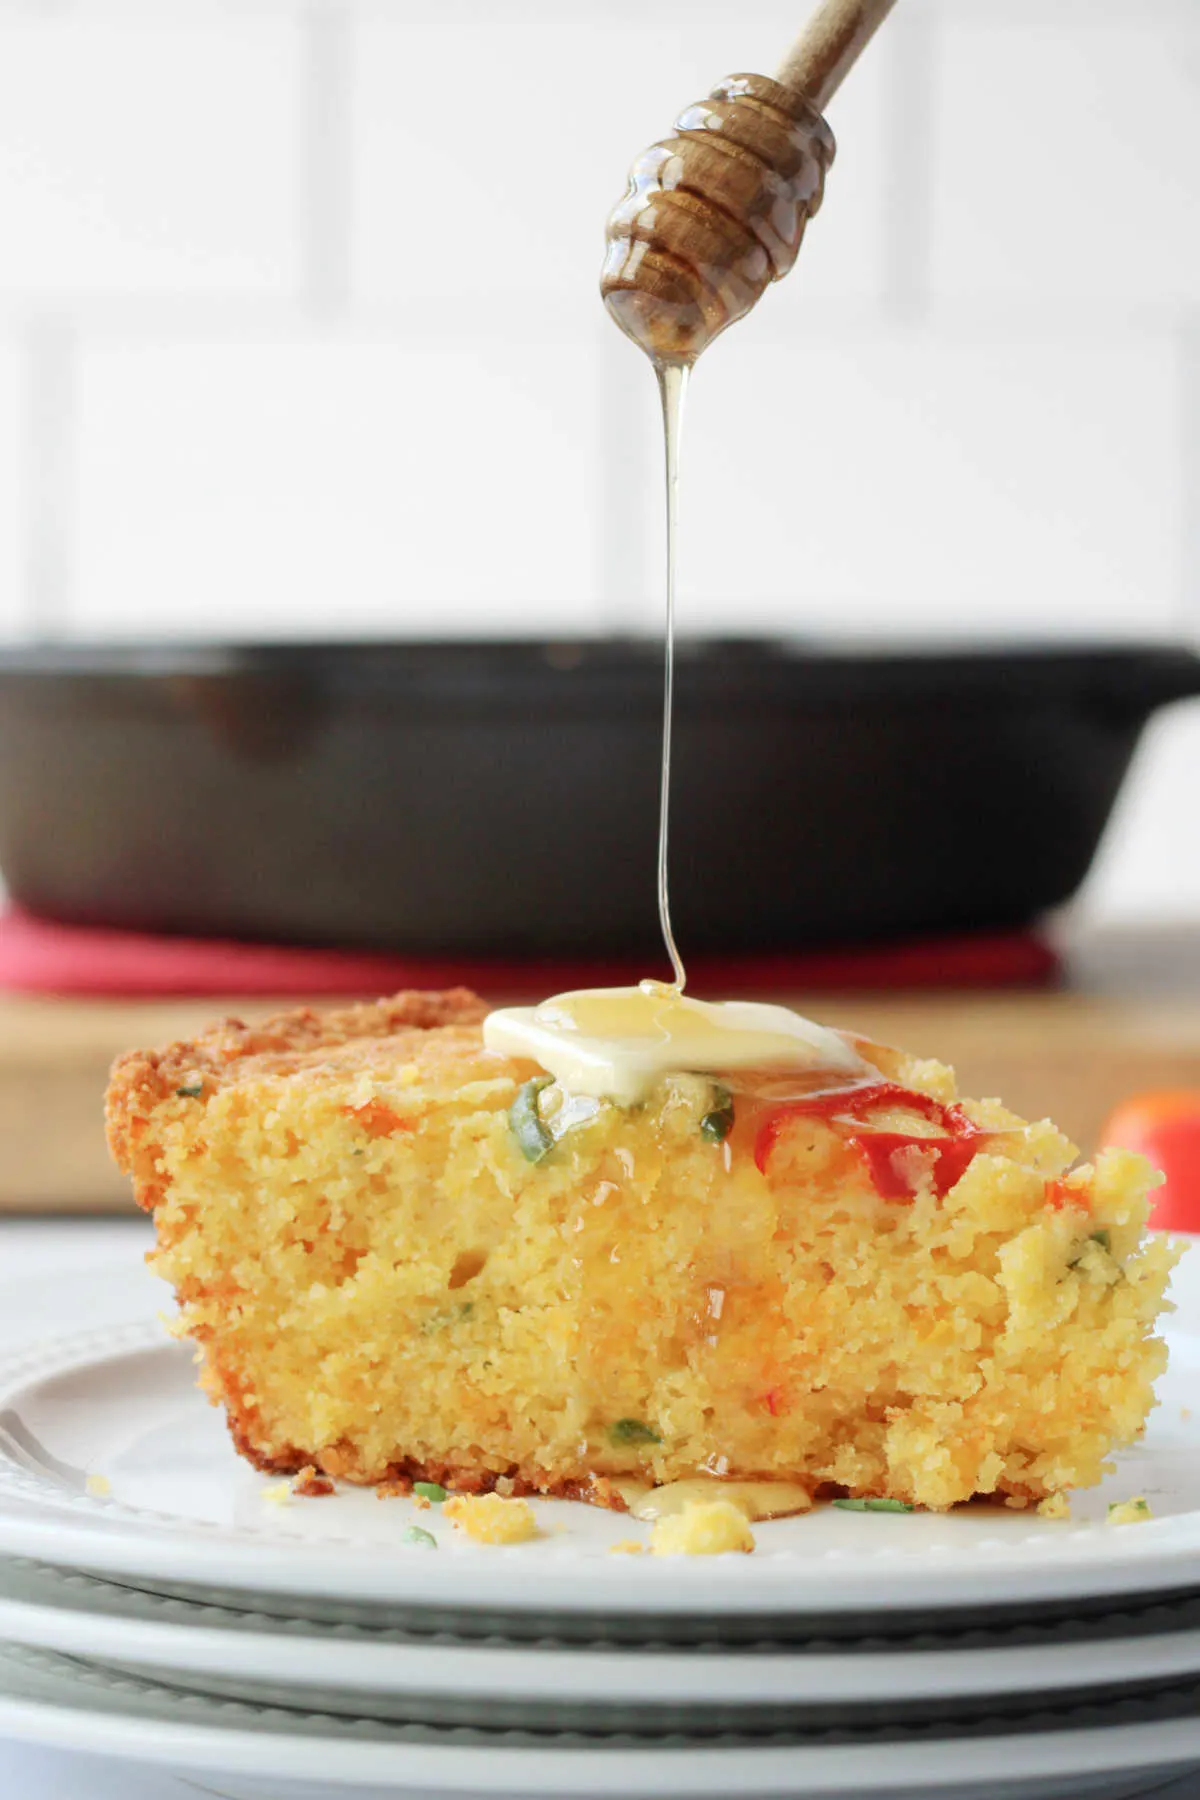 Honey being drizzled over slice of loaded cornbread topped with a pat of butter.